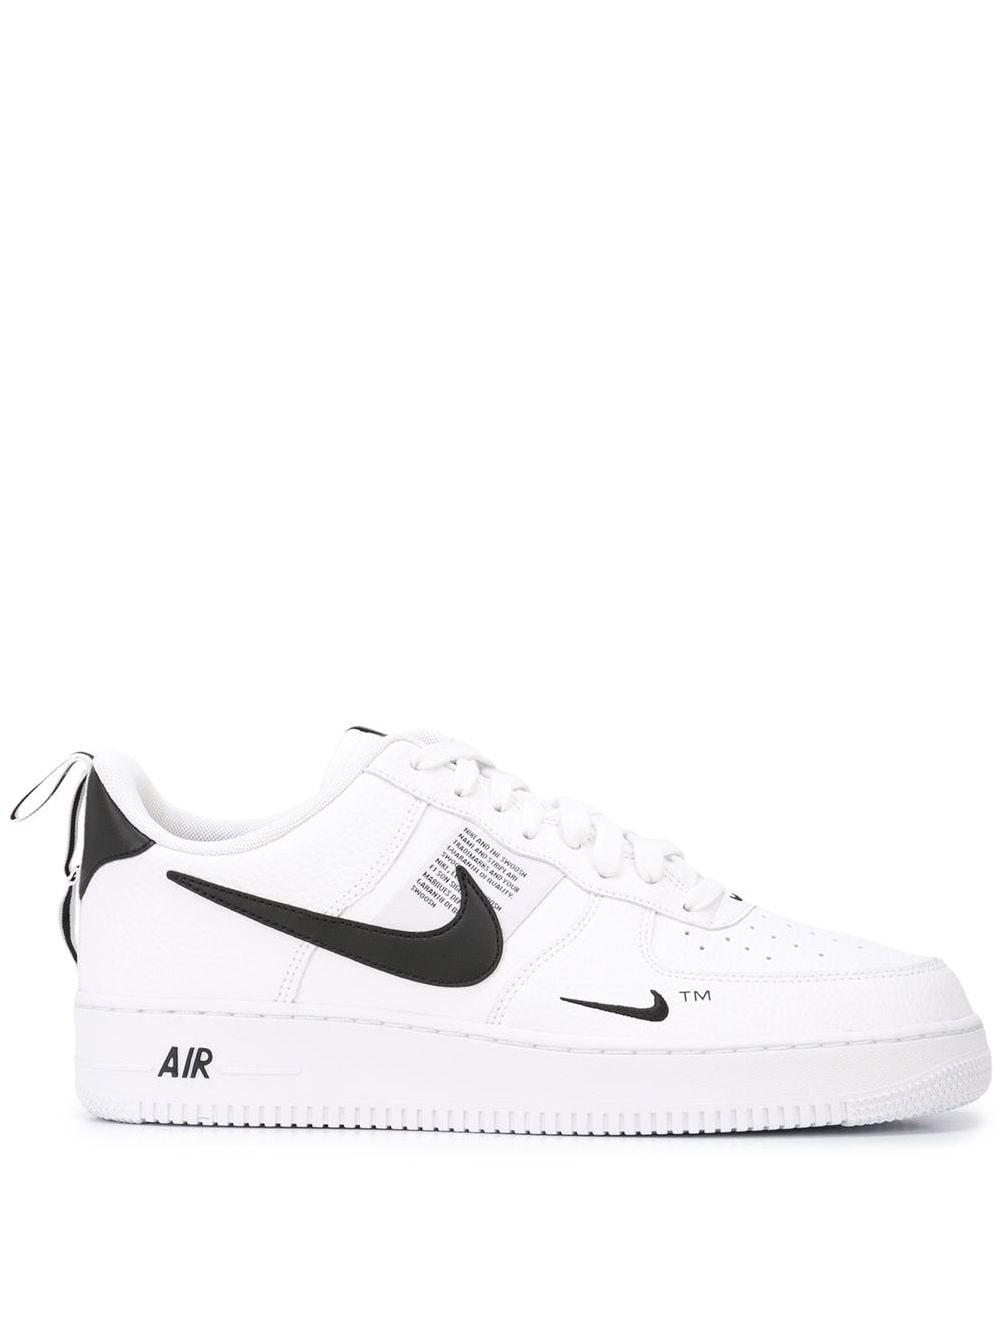 Nike Leather Air Force 1 07 Lv8 Utility Shoes - Size 13 in White/Black ( White) for Men | Lyst